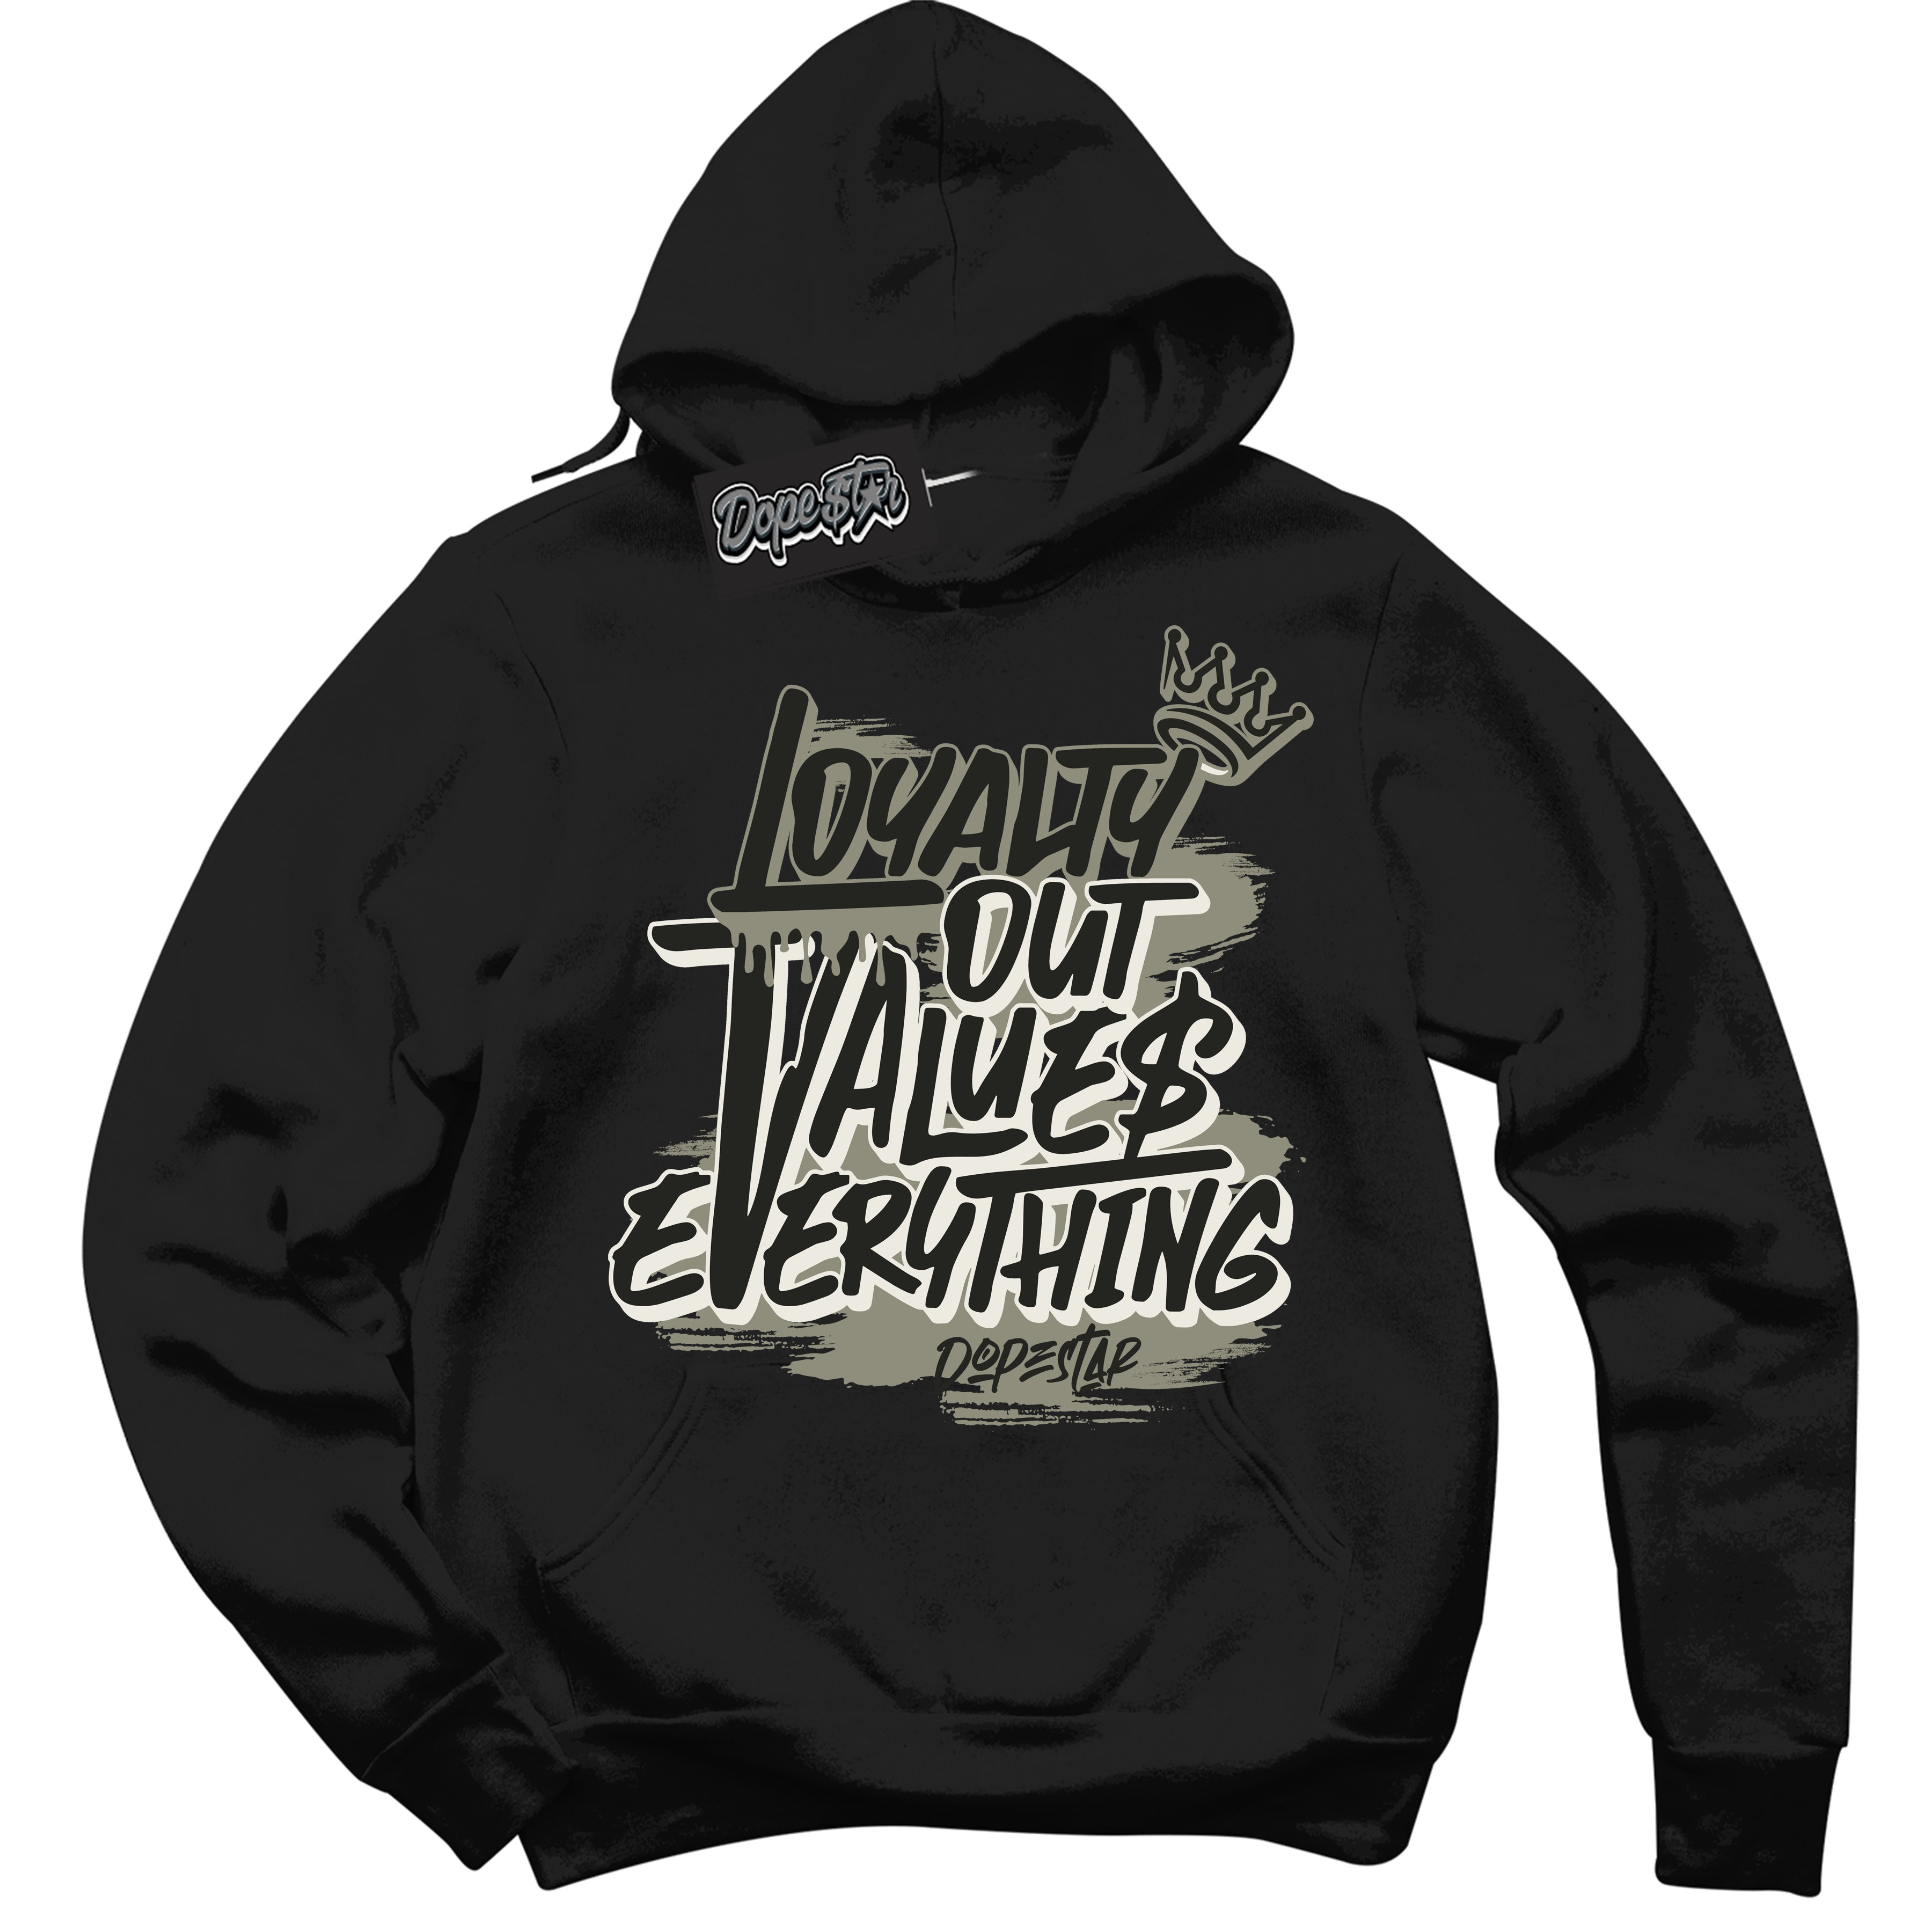 Cool Black Hoodie with “ Loyalty Out Values Everything ”  design that Perfectly Matches  AJKO Shadow 1s Sneakers.